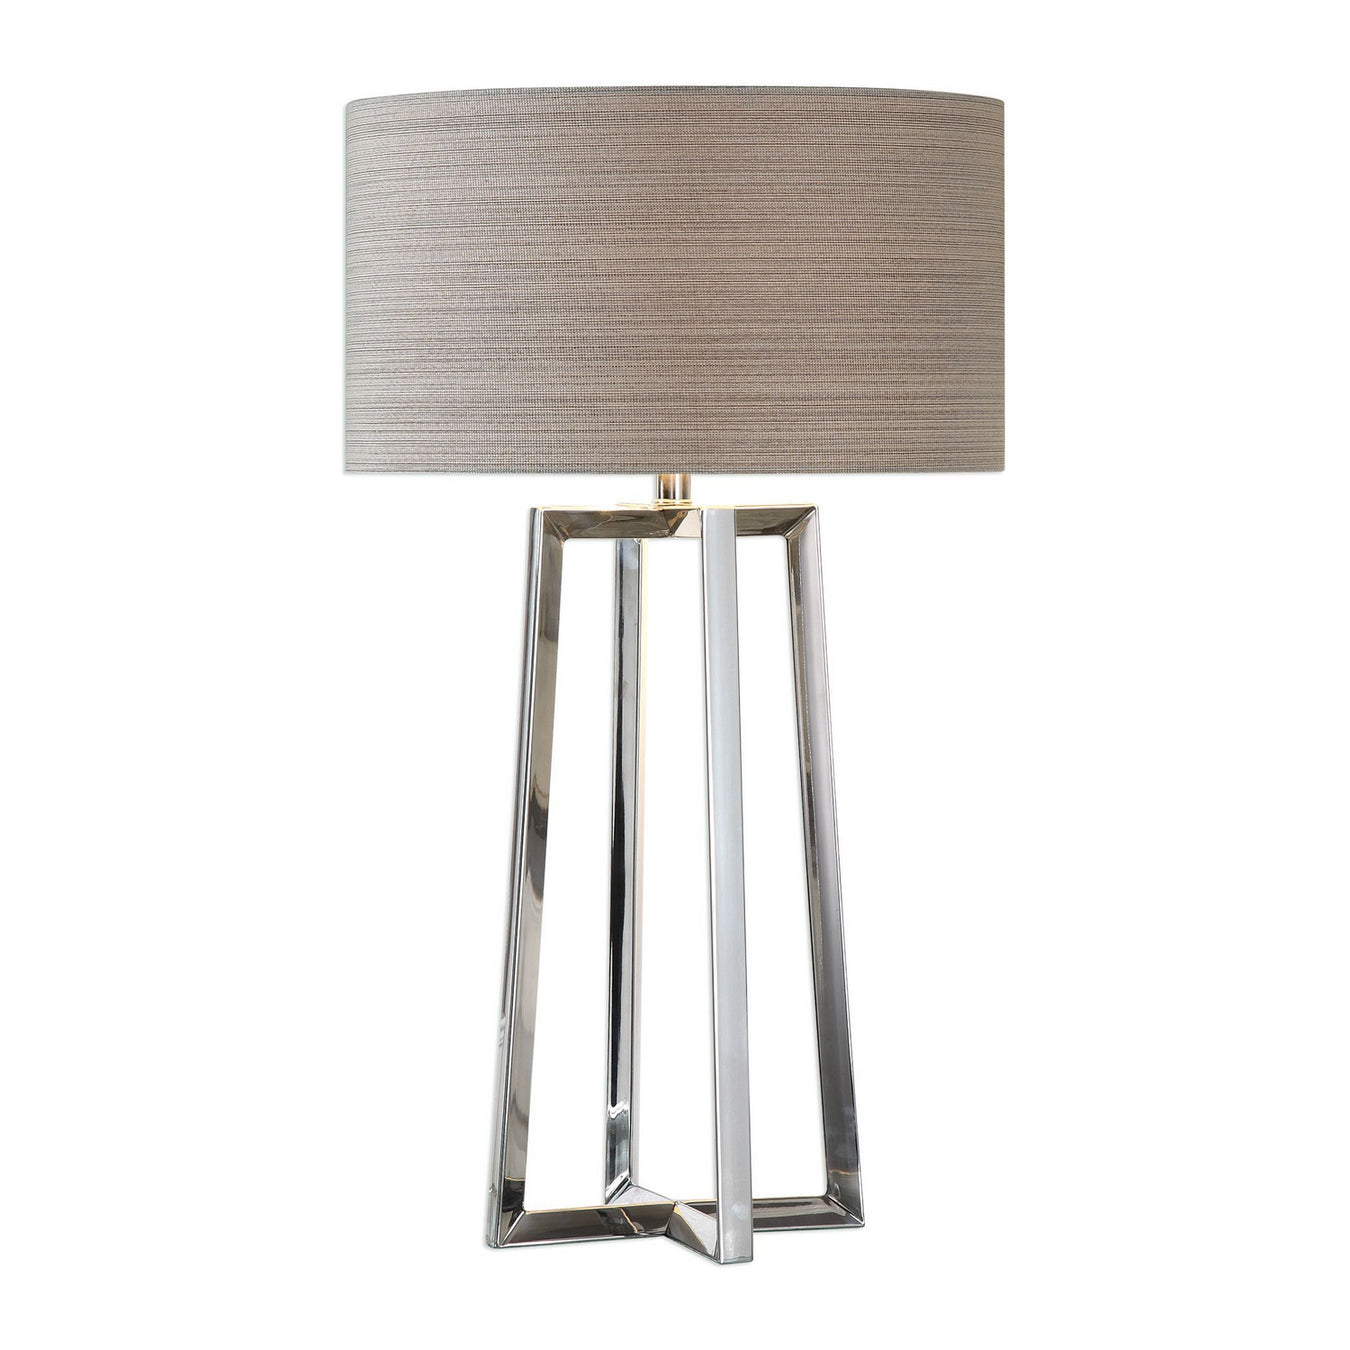 Uttermost's Keokee Stainless Steel Table Lamp Designed by Jim Parsons